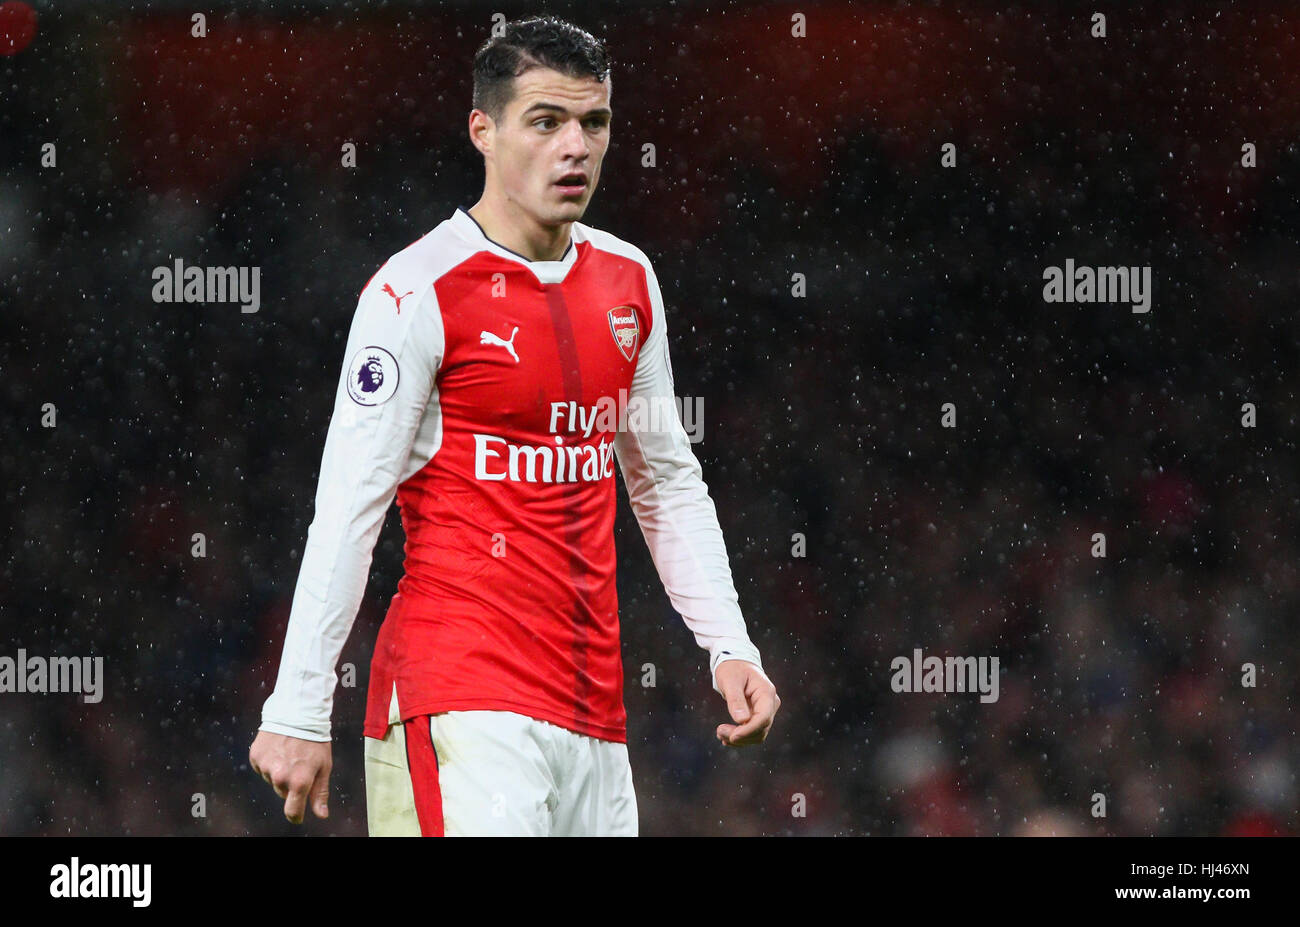 Granit Xhaka of Arsenal during the Premier League match between Arsenal and Crystal Palace at the Emirates Stadium in London. December 1, 2017. EDITORIAL USE ONLY Stock Photo